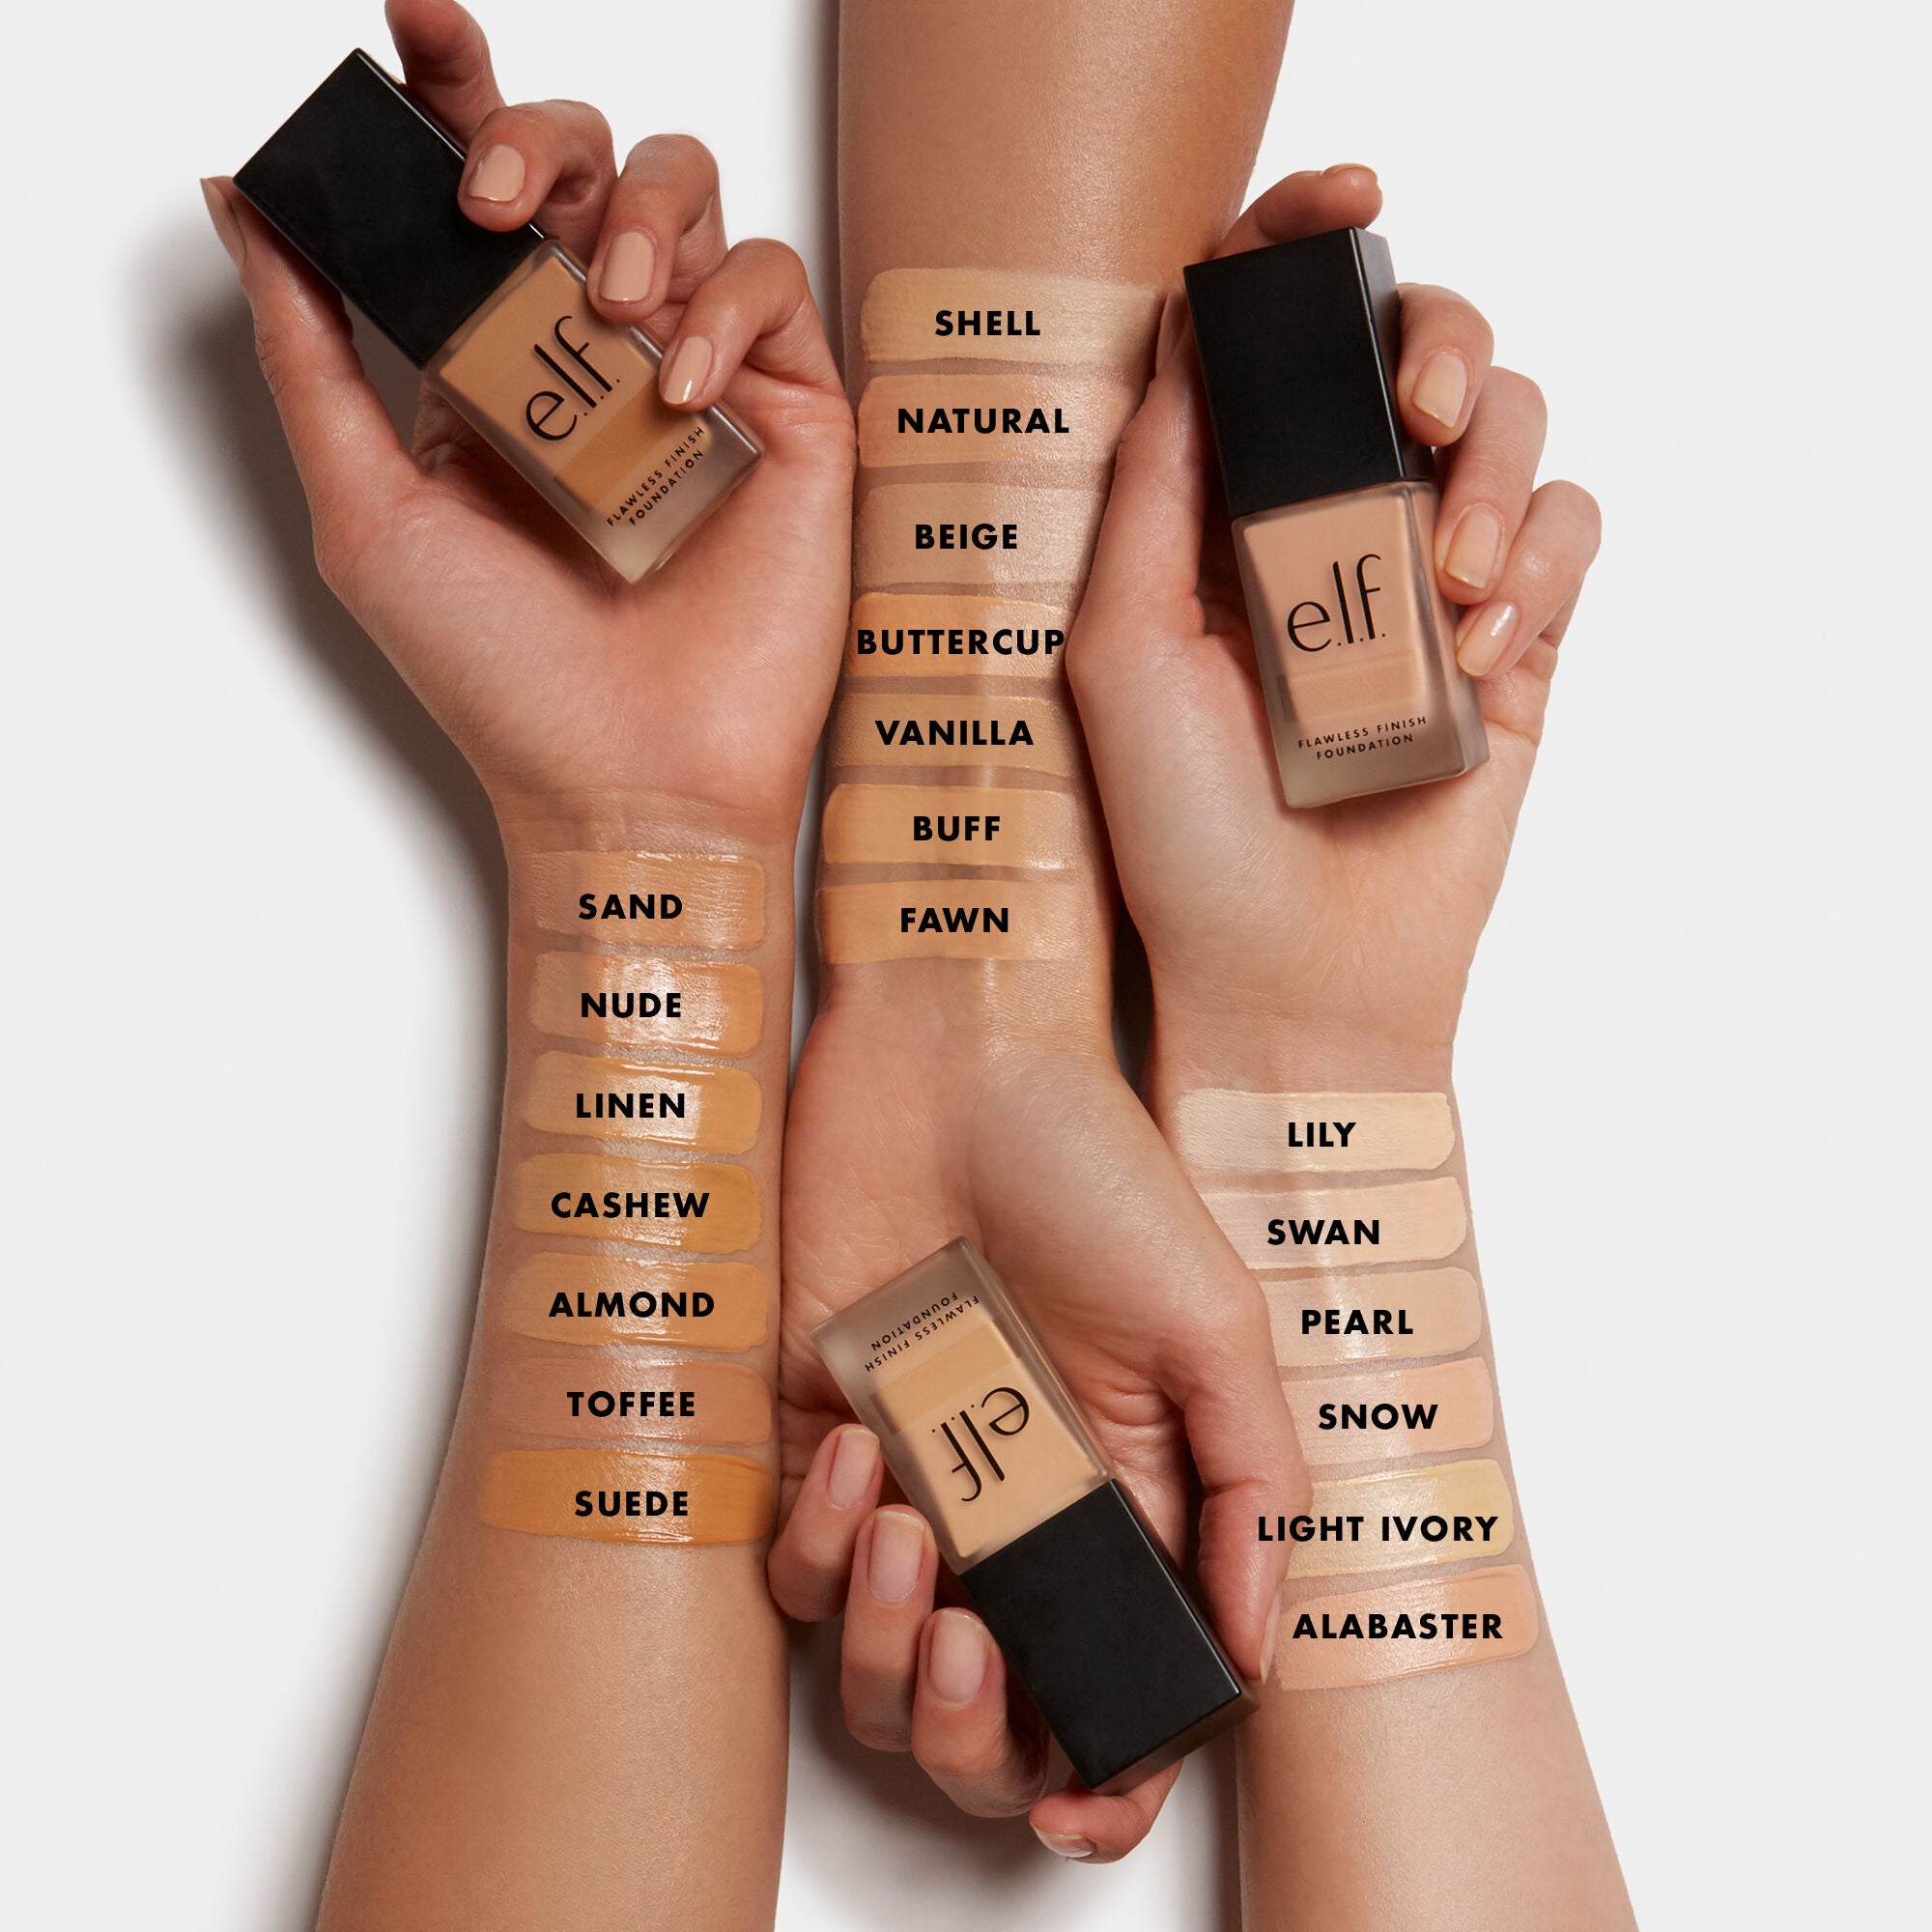 Swatches of elf Flawless Finish Foundation SPF15 on model's arms 